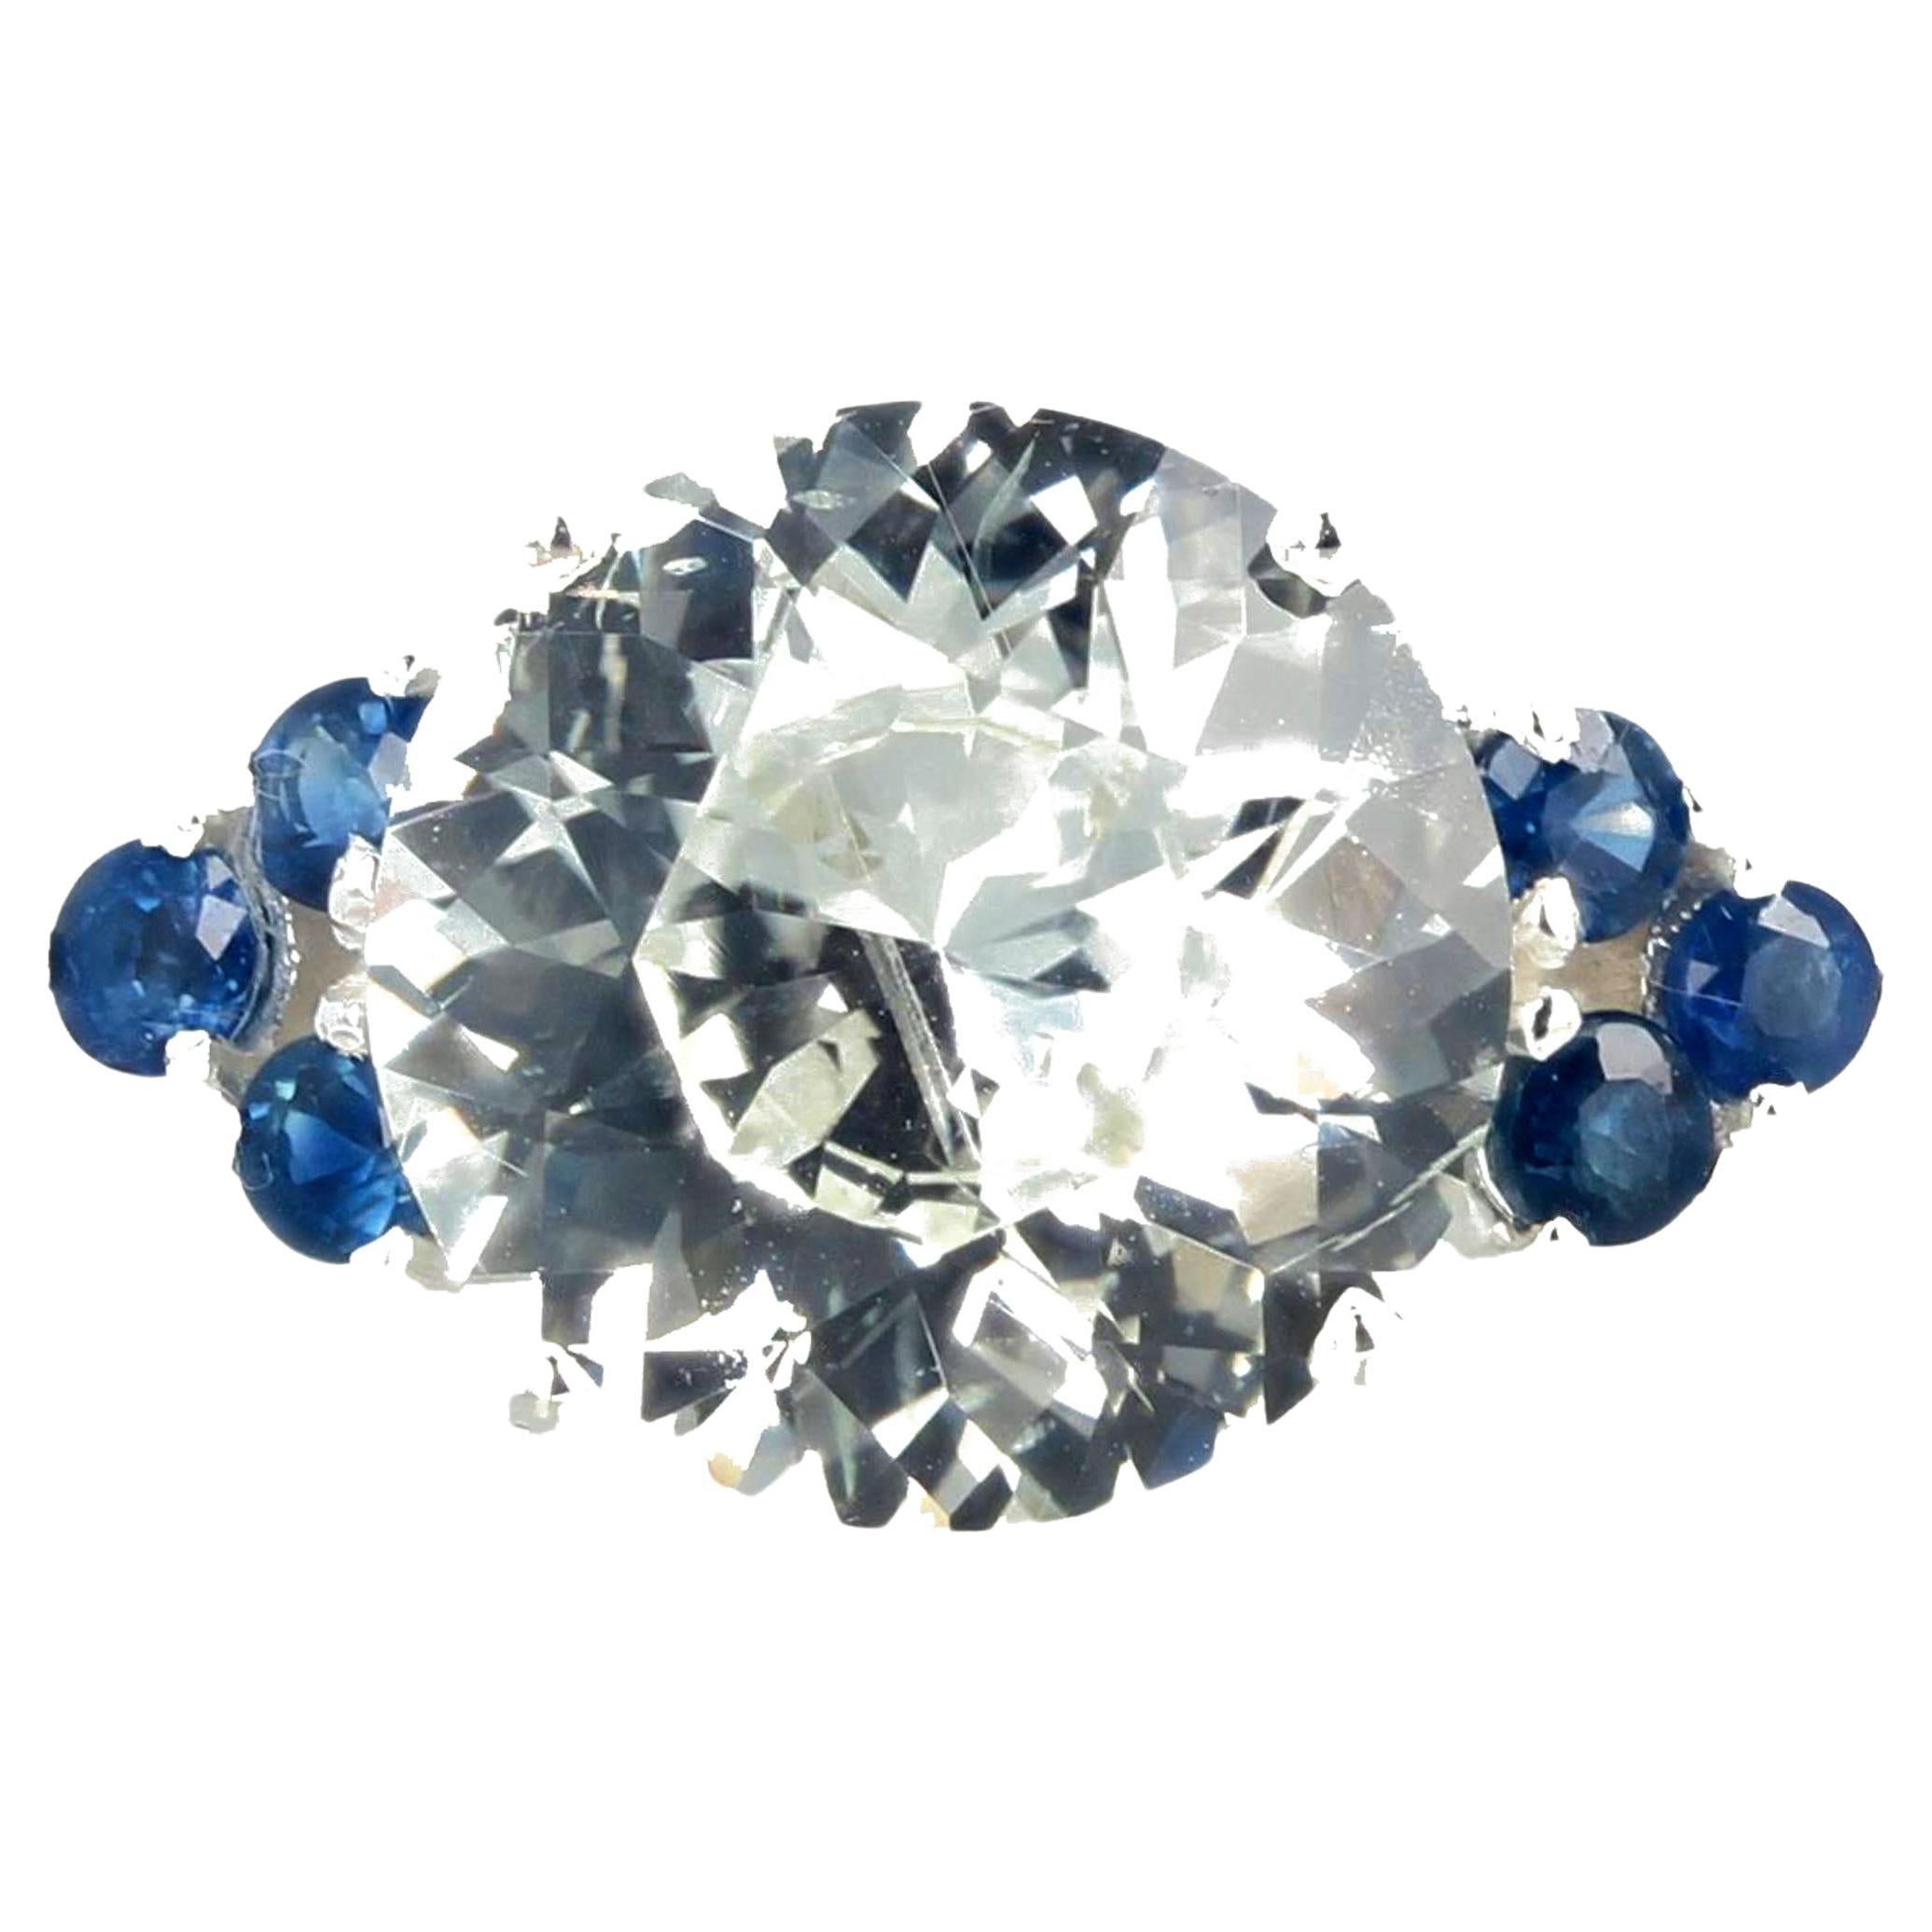 This stunning glittering 6.52 carat natural white Zircon has more fire than a diamond !  This is a 100 percent natural gemstone that comes from the earth in Cambodia.  The deep blue Sapphire side gemstones are 0.60 carats and the ring is a sterling